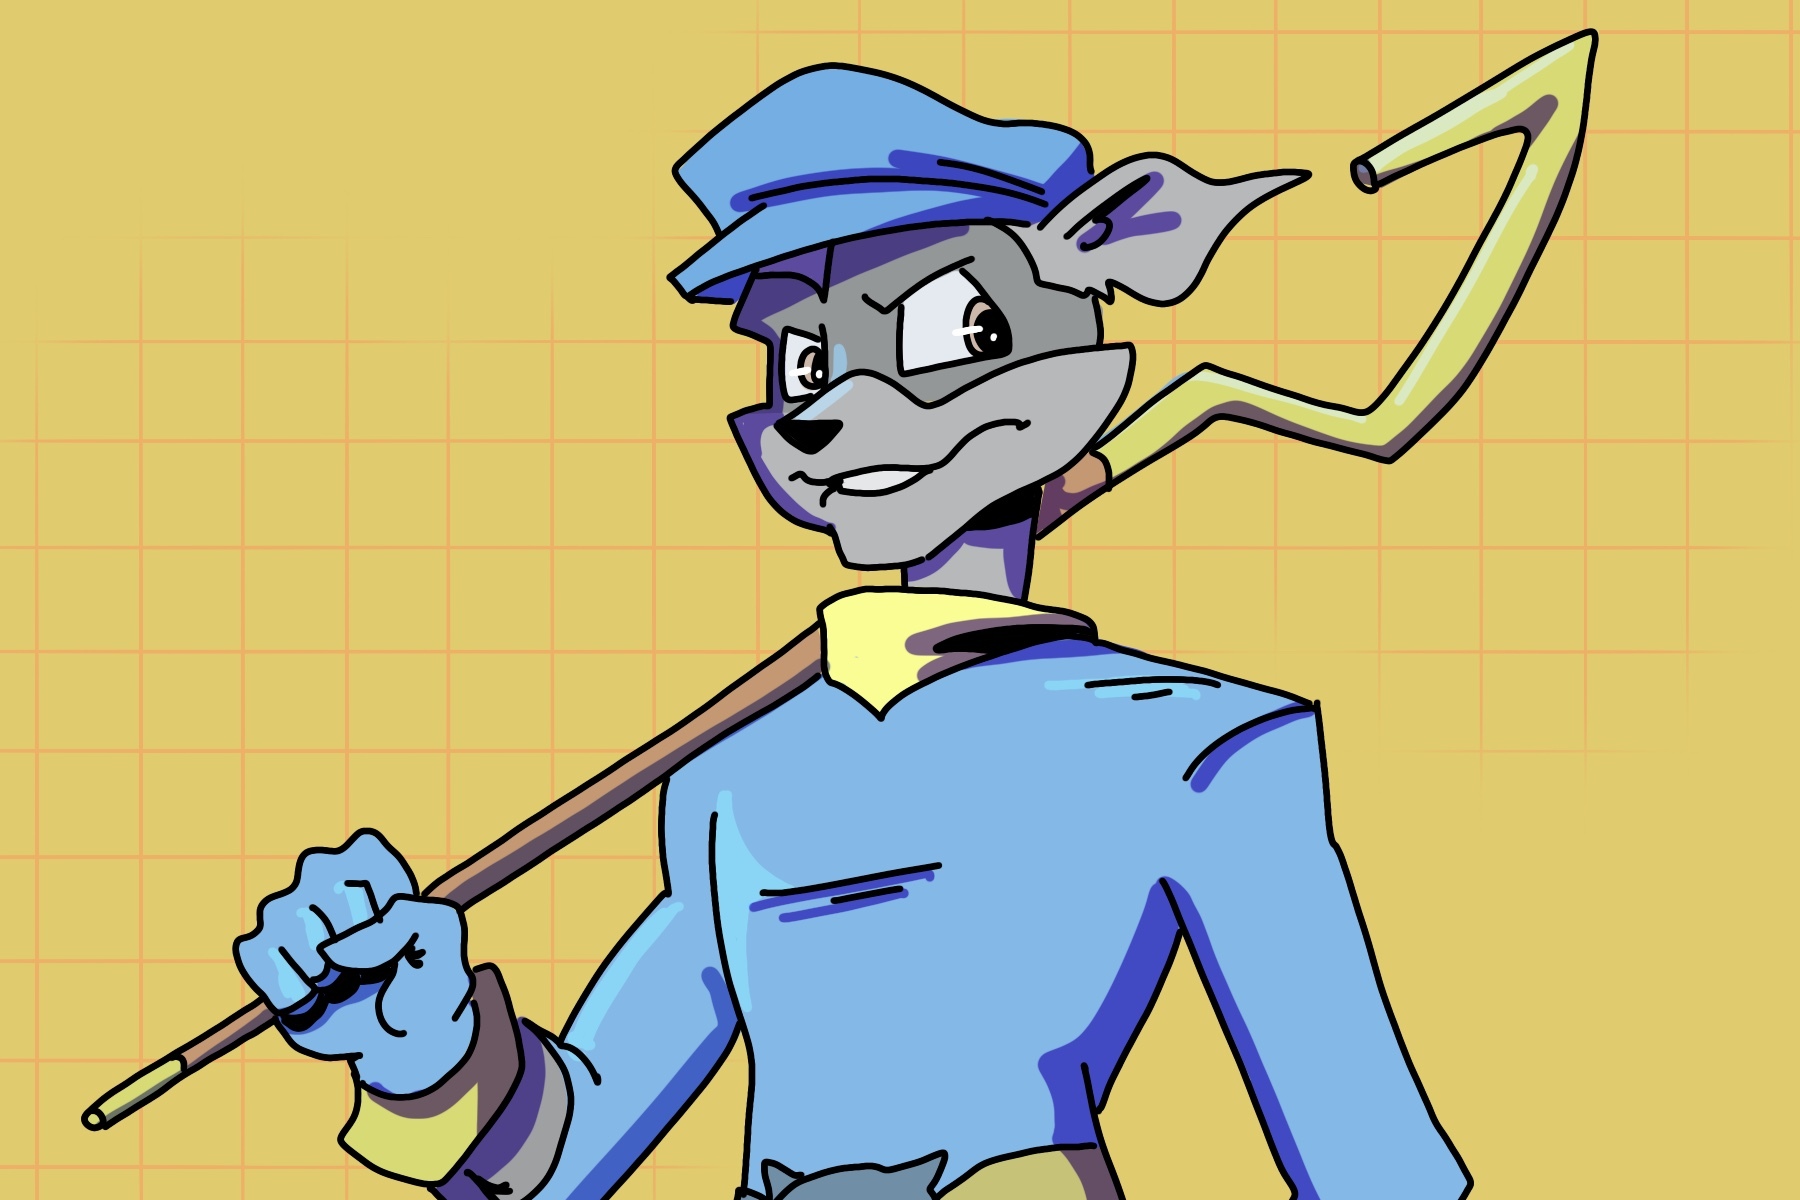 In an article about the Sony character Sly Cooper, an illustration of the main character.